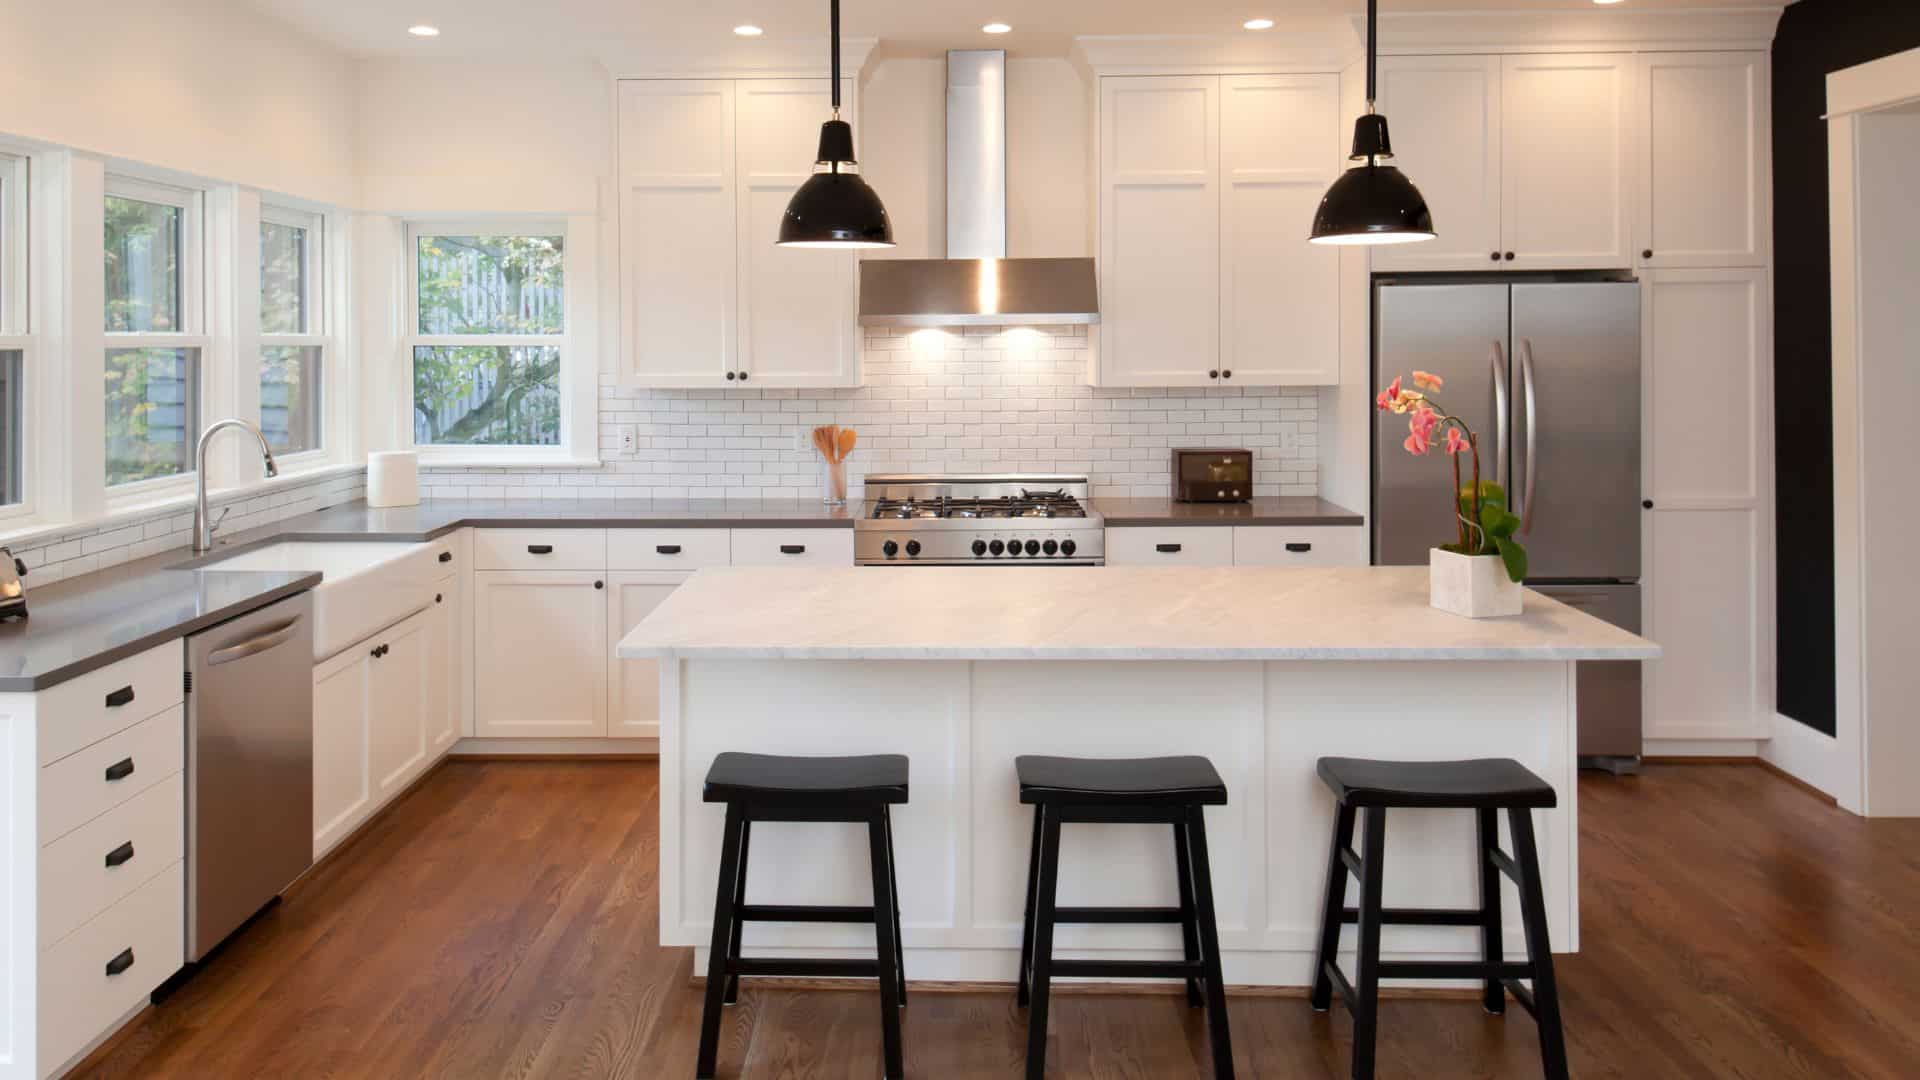 L Type kitchen with white shaker cabinets